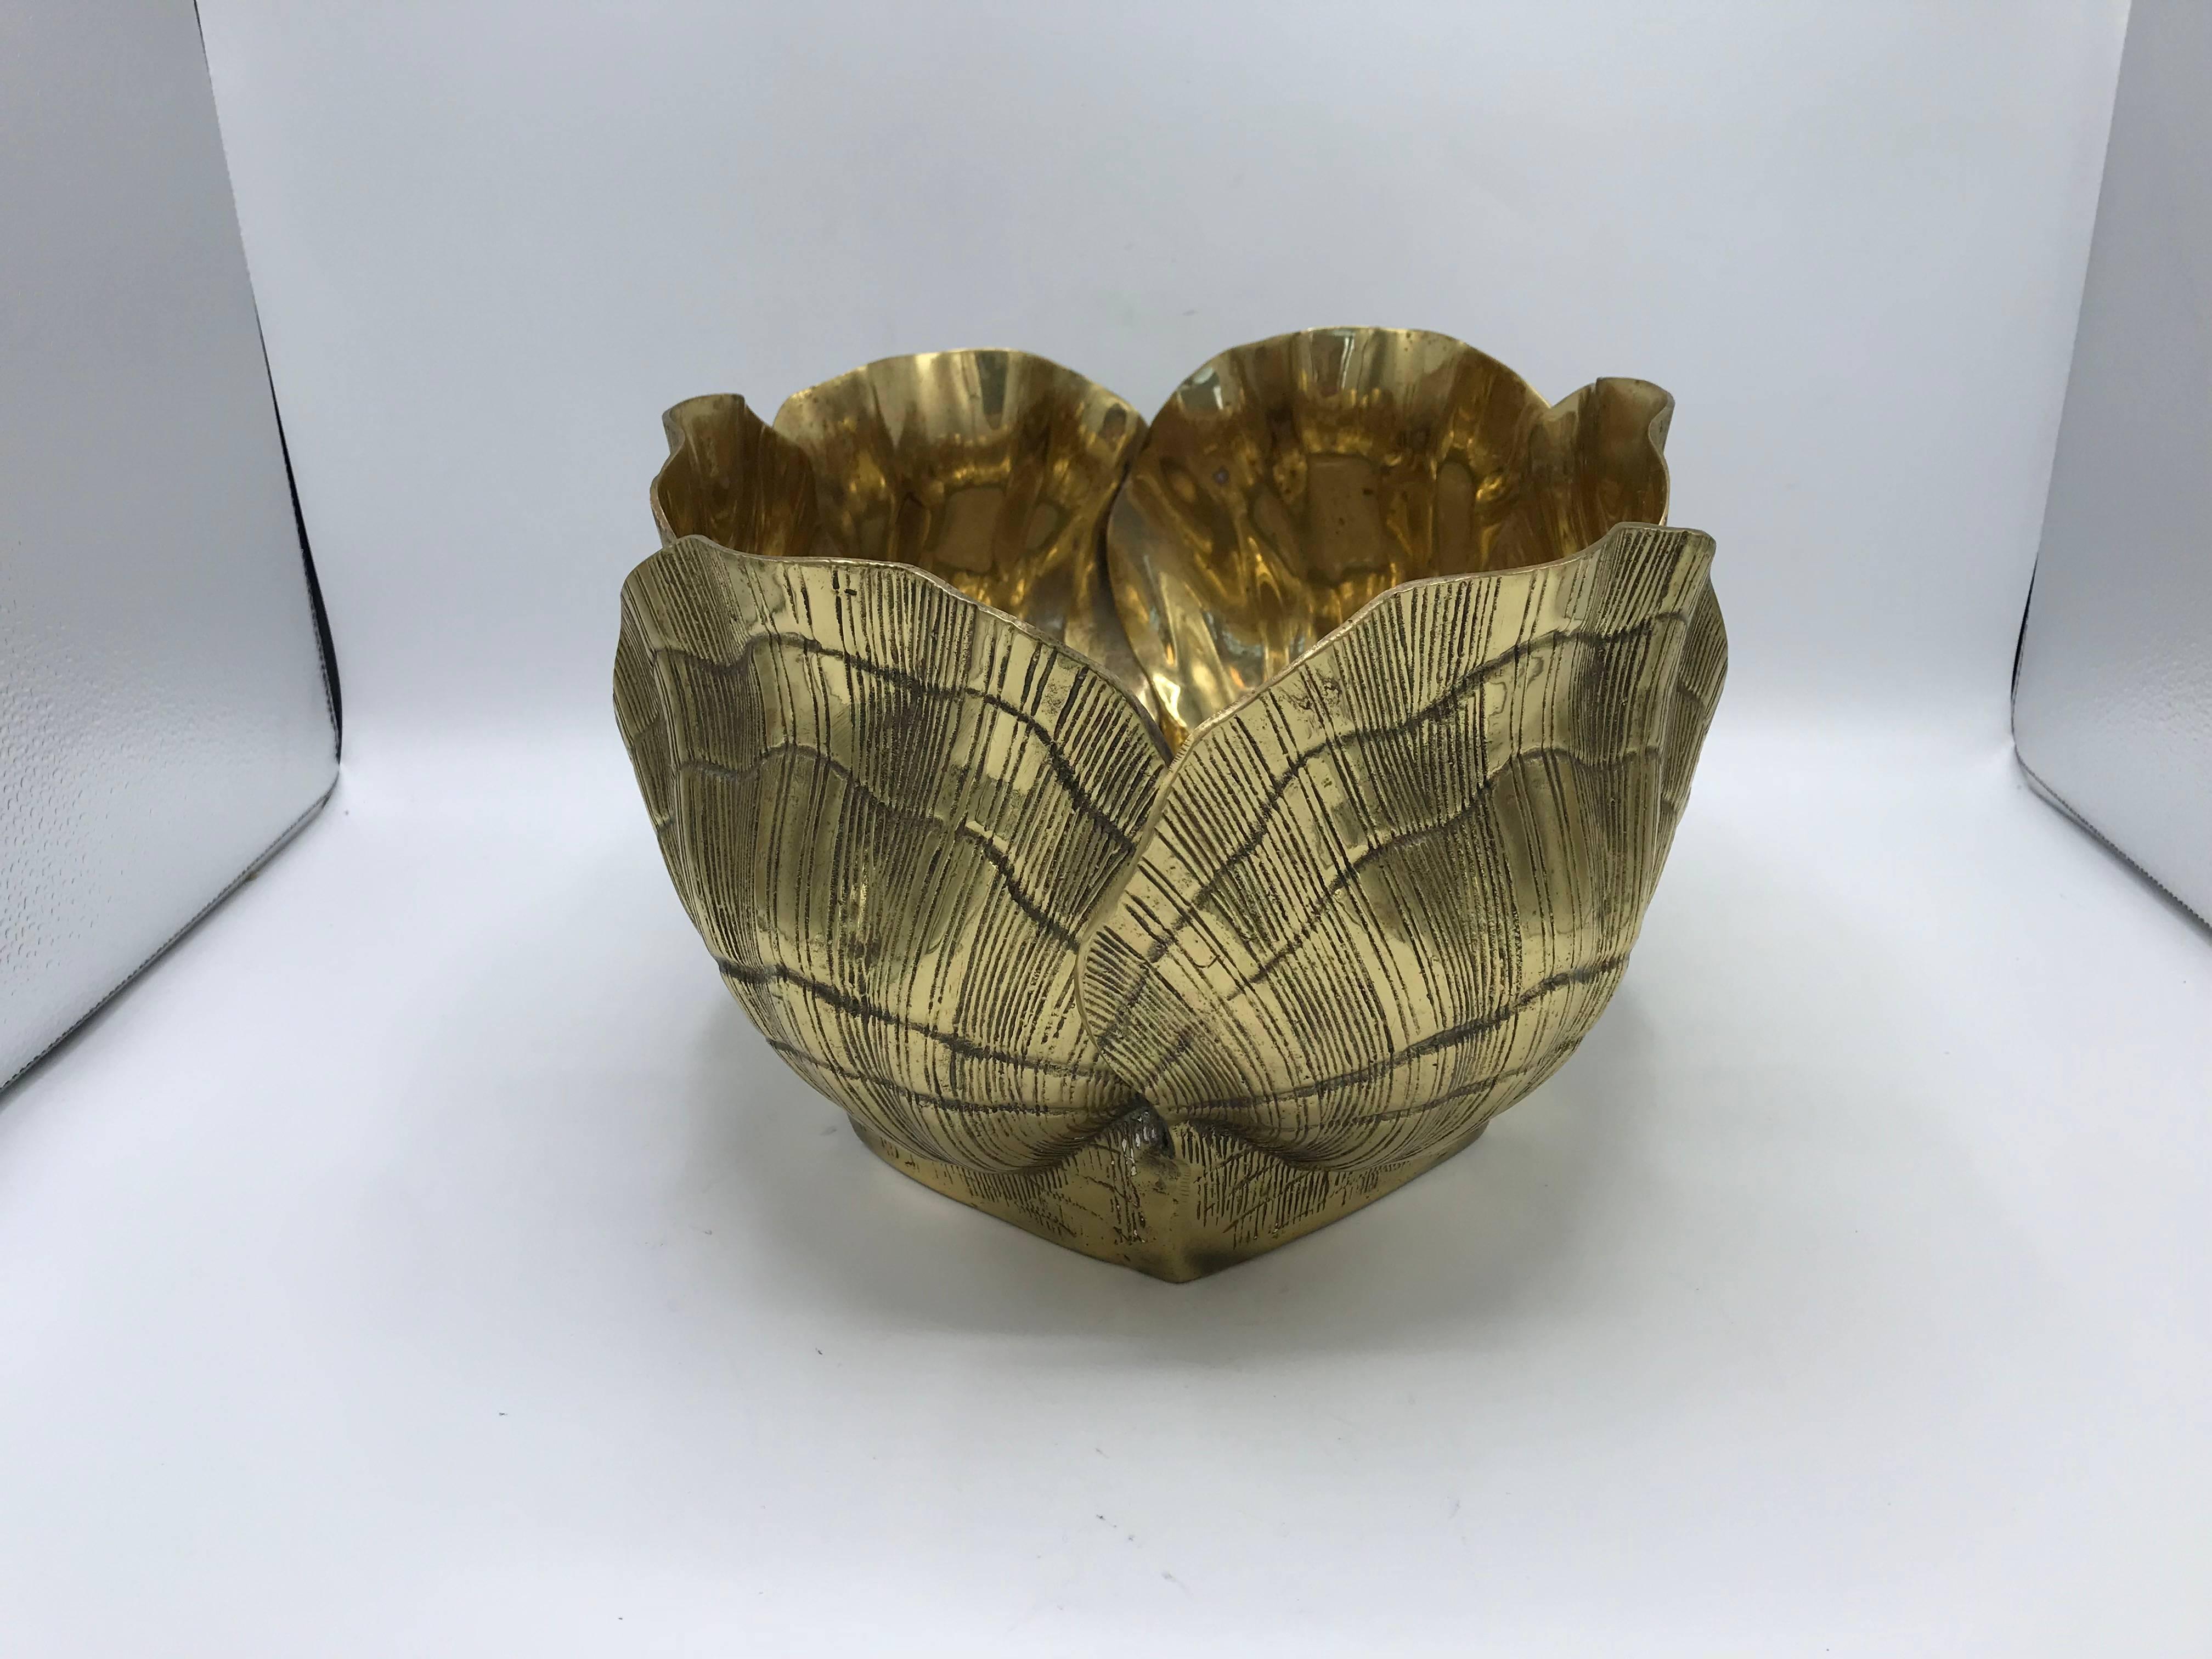 Listed is a fabulous, Hollywood Regency, 1970s Italian brass seashell cachepot-planter. The piece is substantial and would make a great table centerpiece!